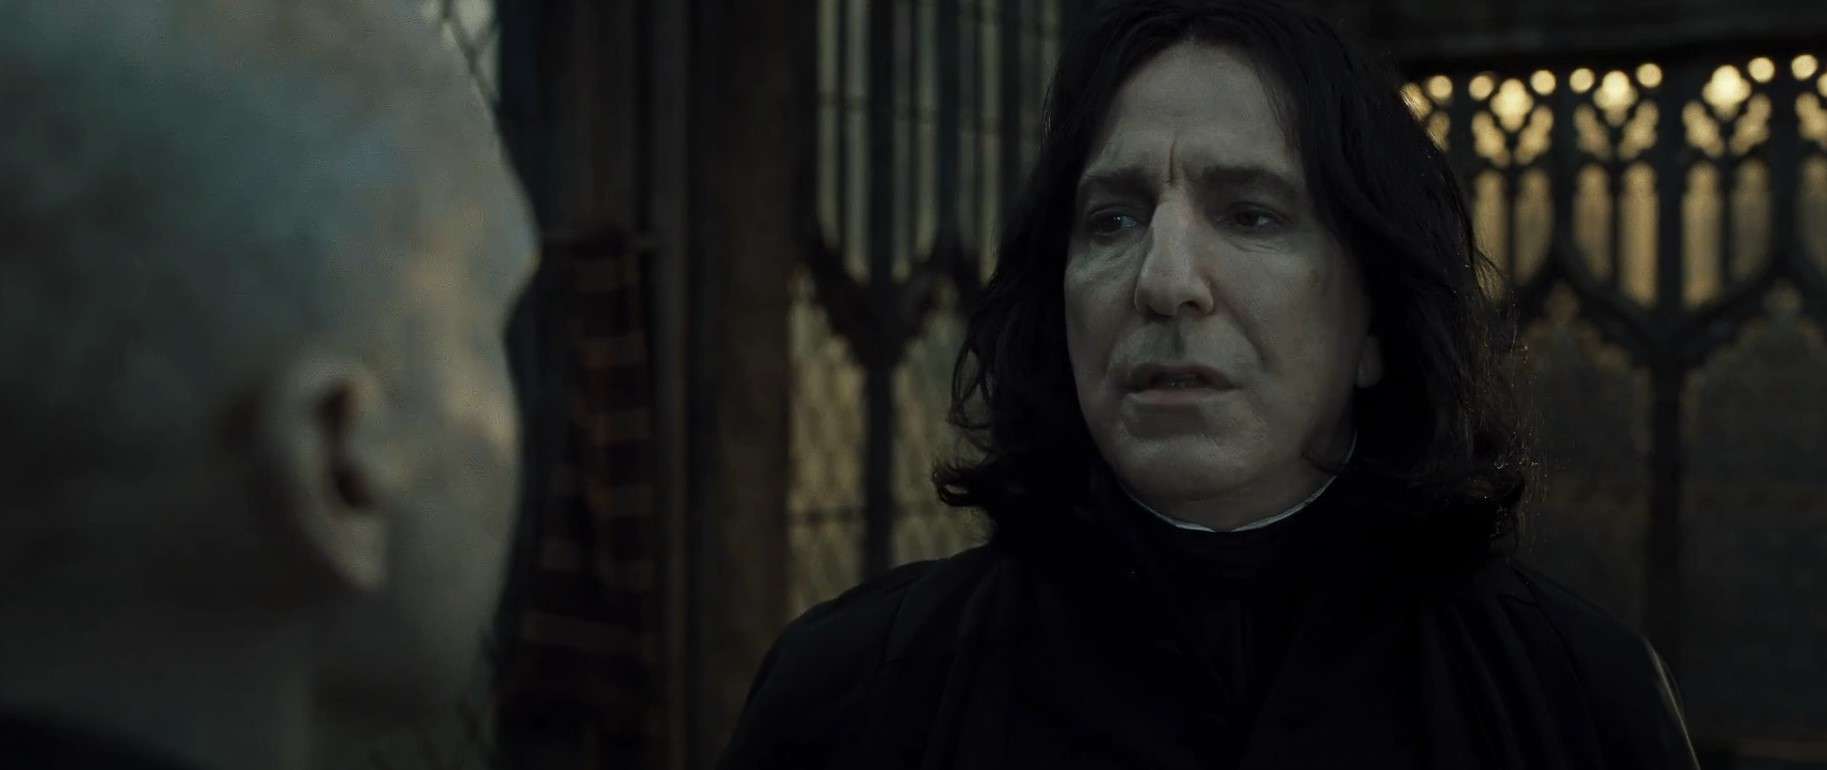 Why Did Voldemort Kill Snape?